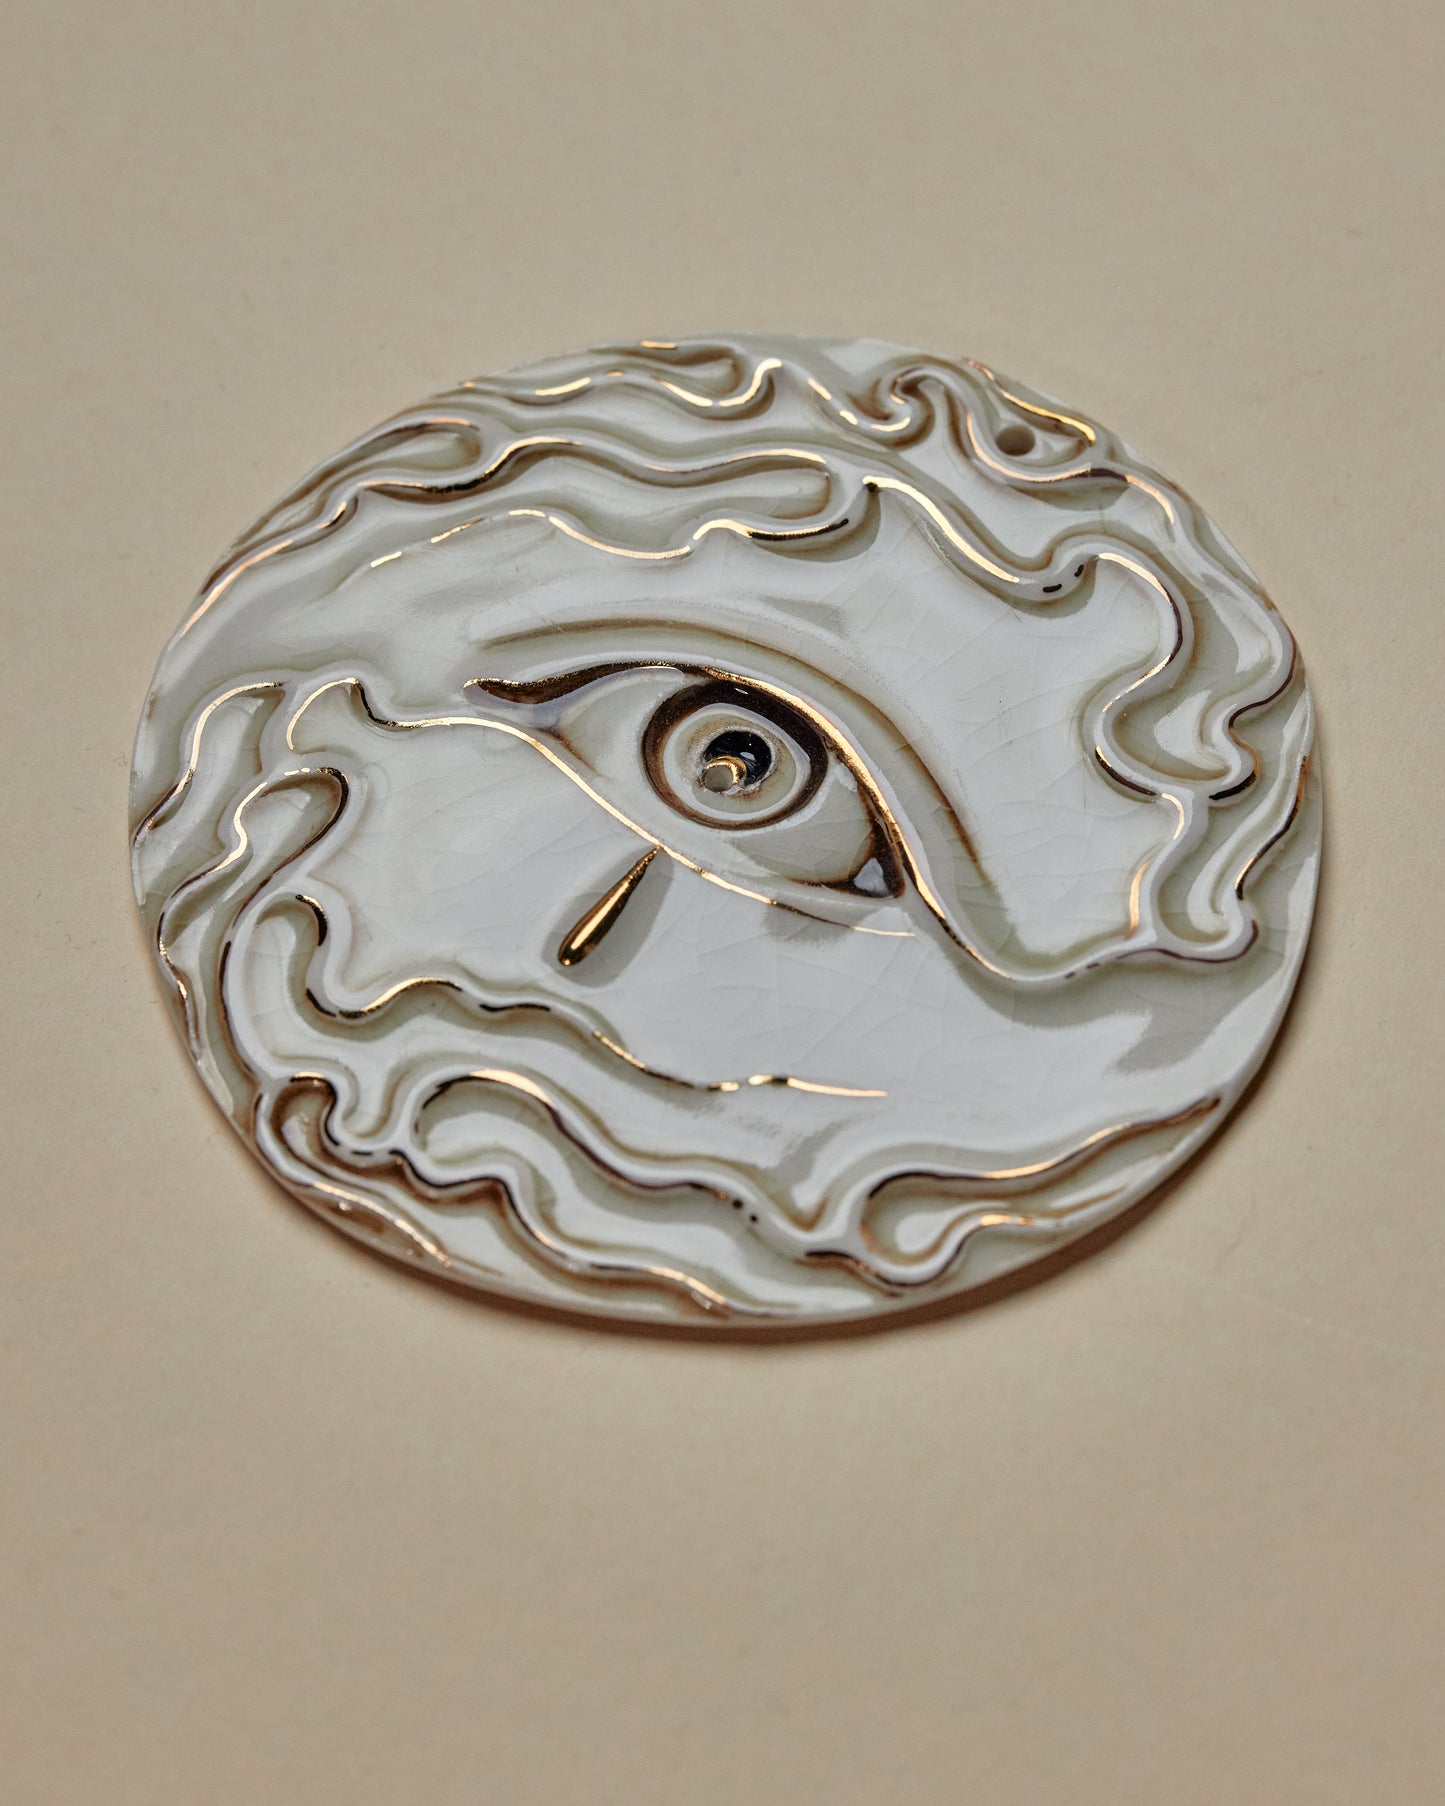 Flaming Eye Incense Holder / Wall Ornament 6 - Hand crafted Porcelain Home Ornament. Circular ornament with Eye and Flame Border.